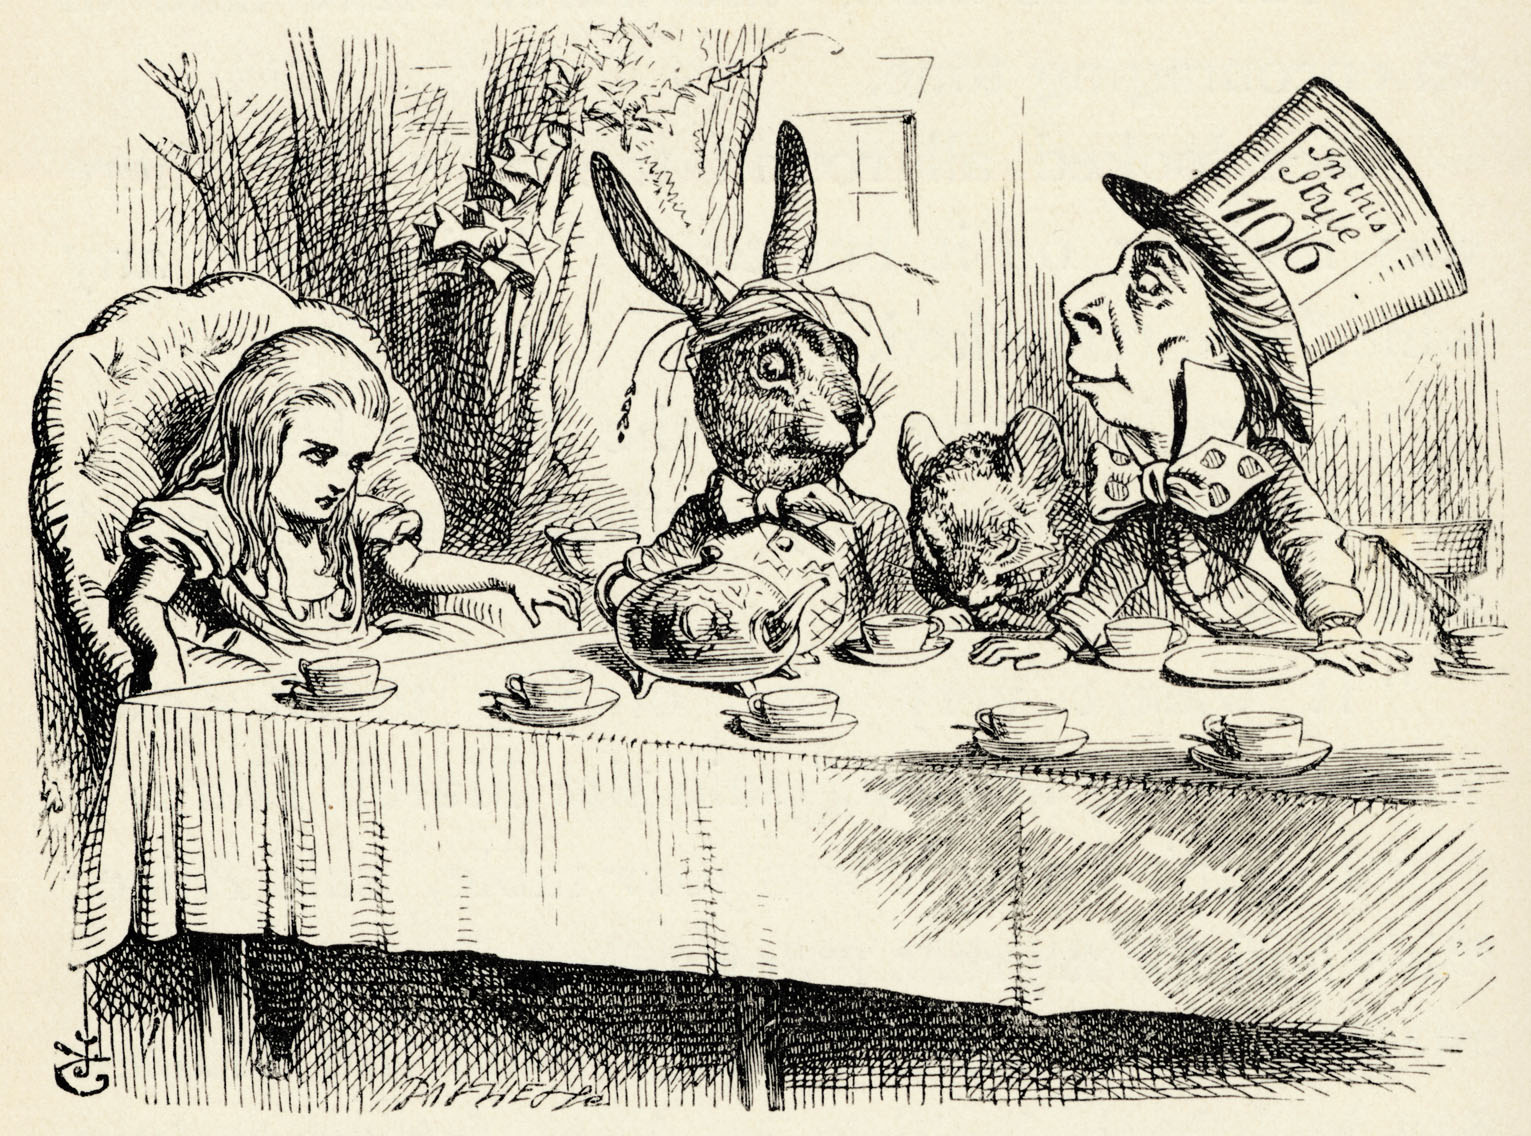 Alice in Wonderland - the Mad Hatter's Tea Party - from the book by Lewis Carroll (Charles Lutwidge Dodgson), English children's writer and mathematician 27 January 1832- 14 January 1898. First published 1865. Illustrations by John Tenniel 1820-1914.  (Photo by Culture Club/Getty Images) (Culture Club&mdash;Getty Images)